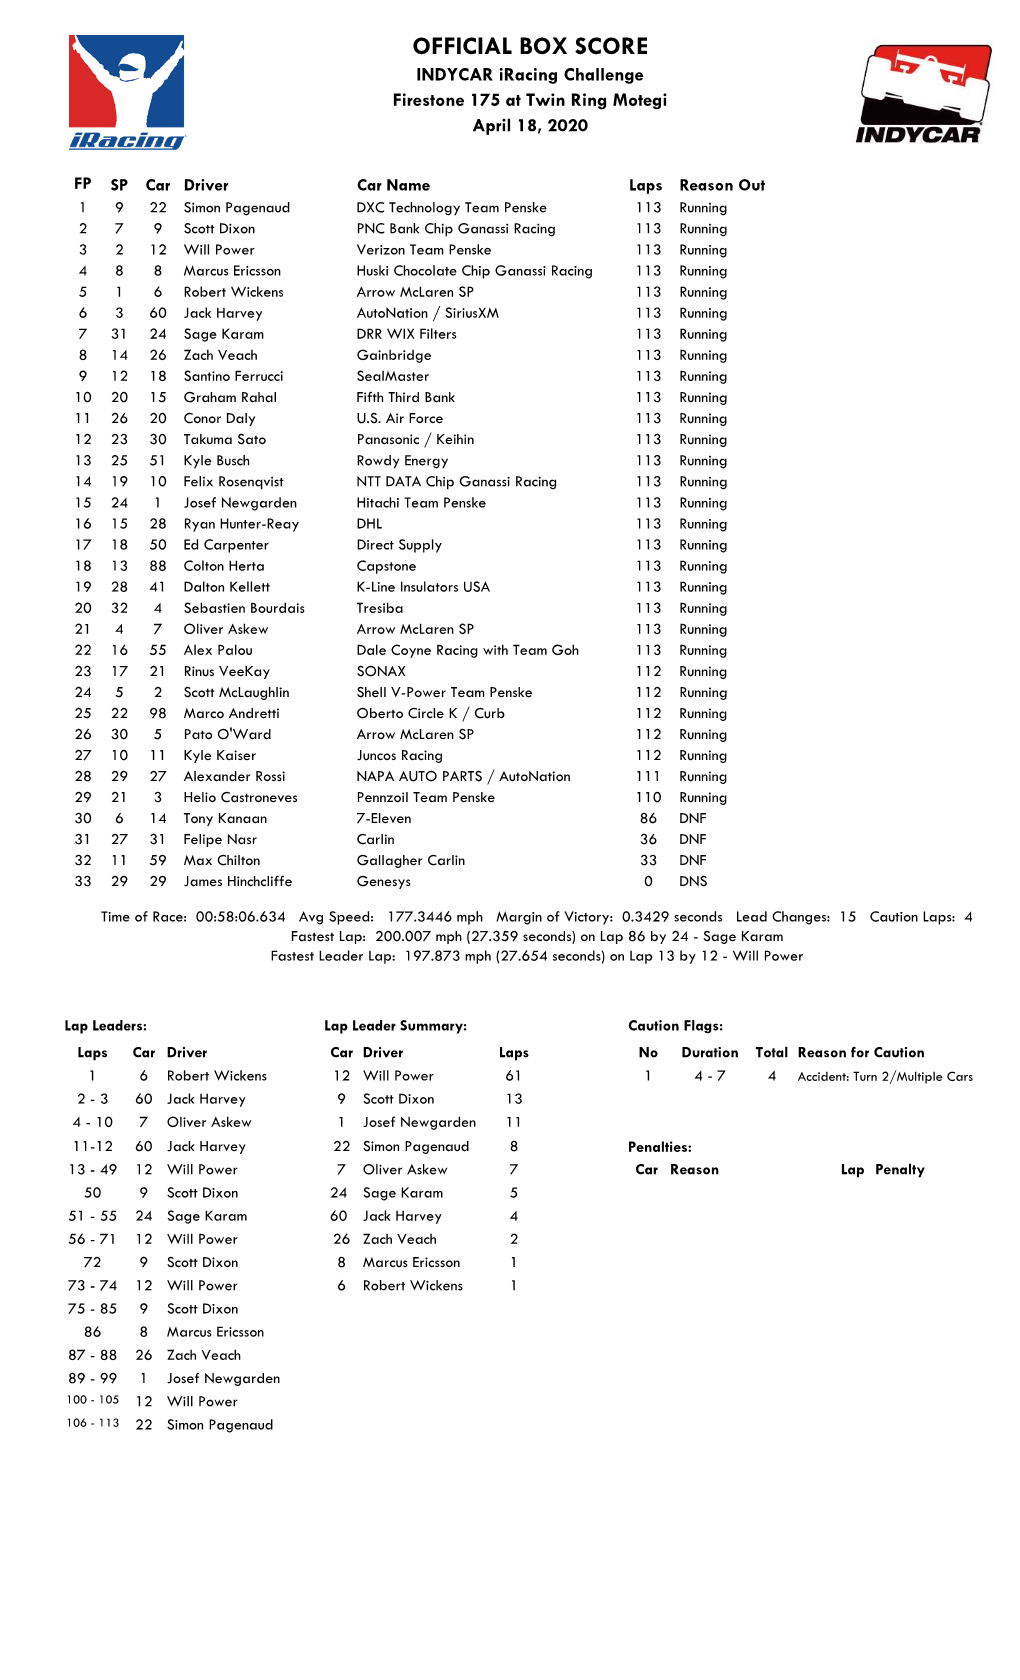 OFFICIAL BOX SCORE INDYCAR Iracing Challenge Firestone 175 at Twin Ring Motegi April 18, 2020